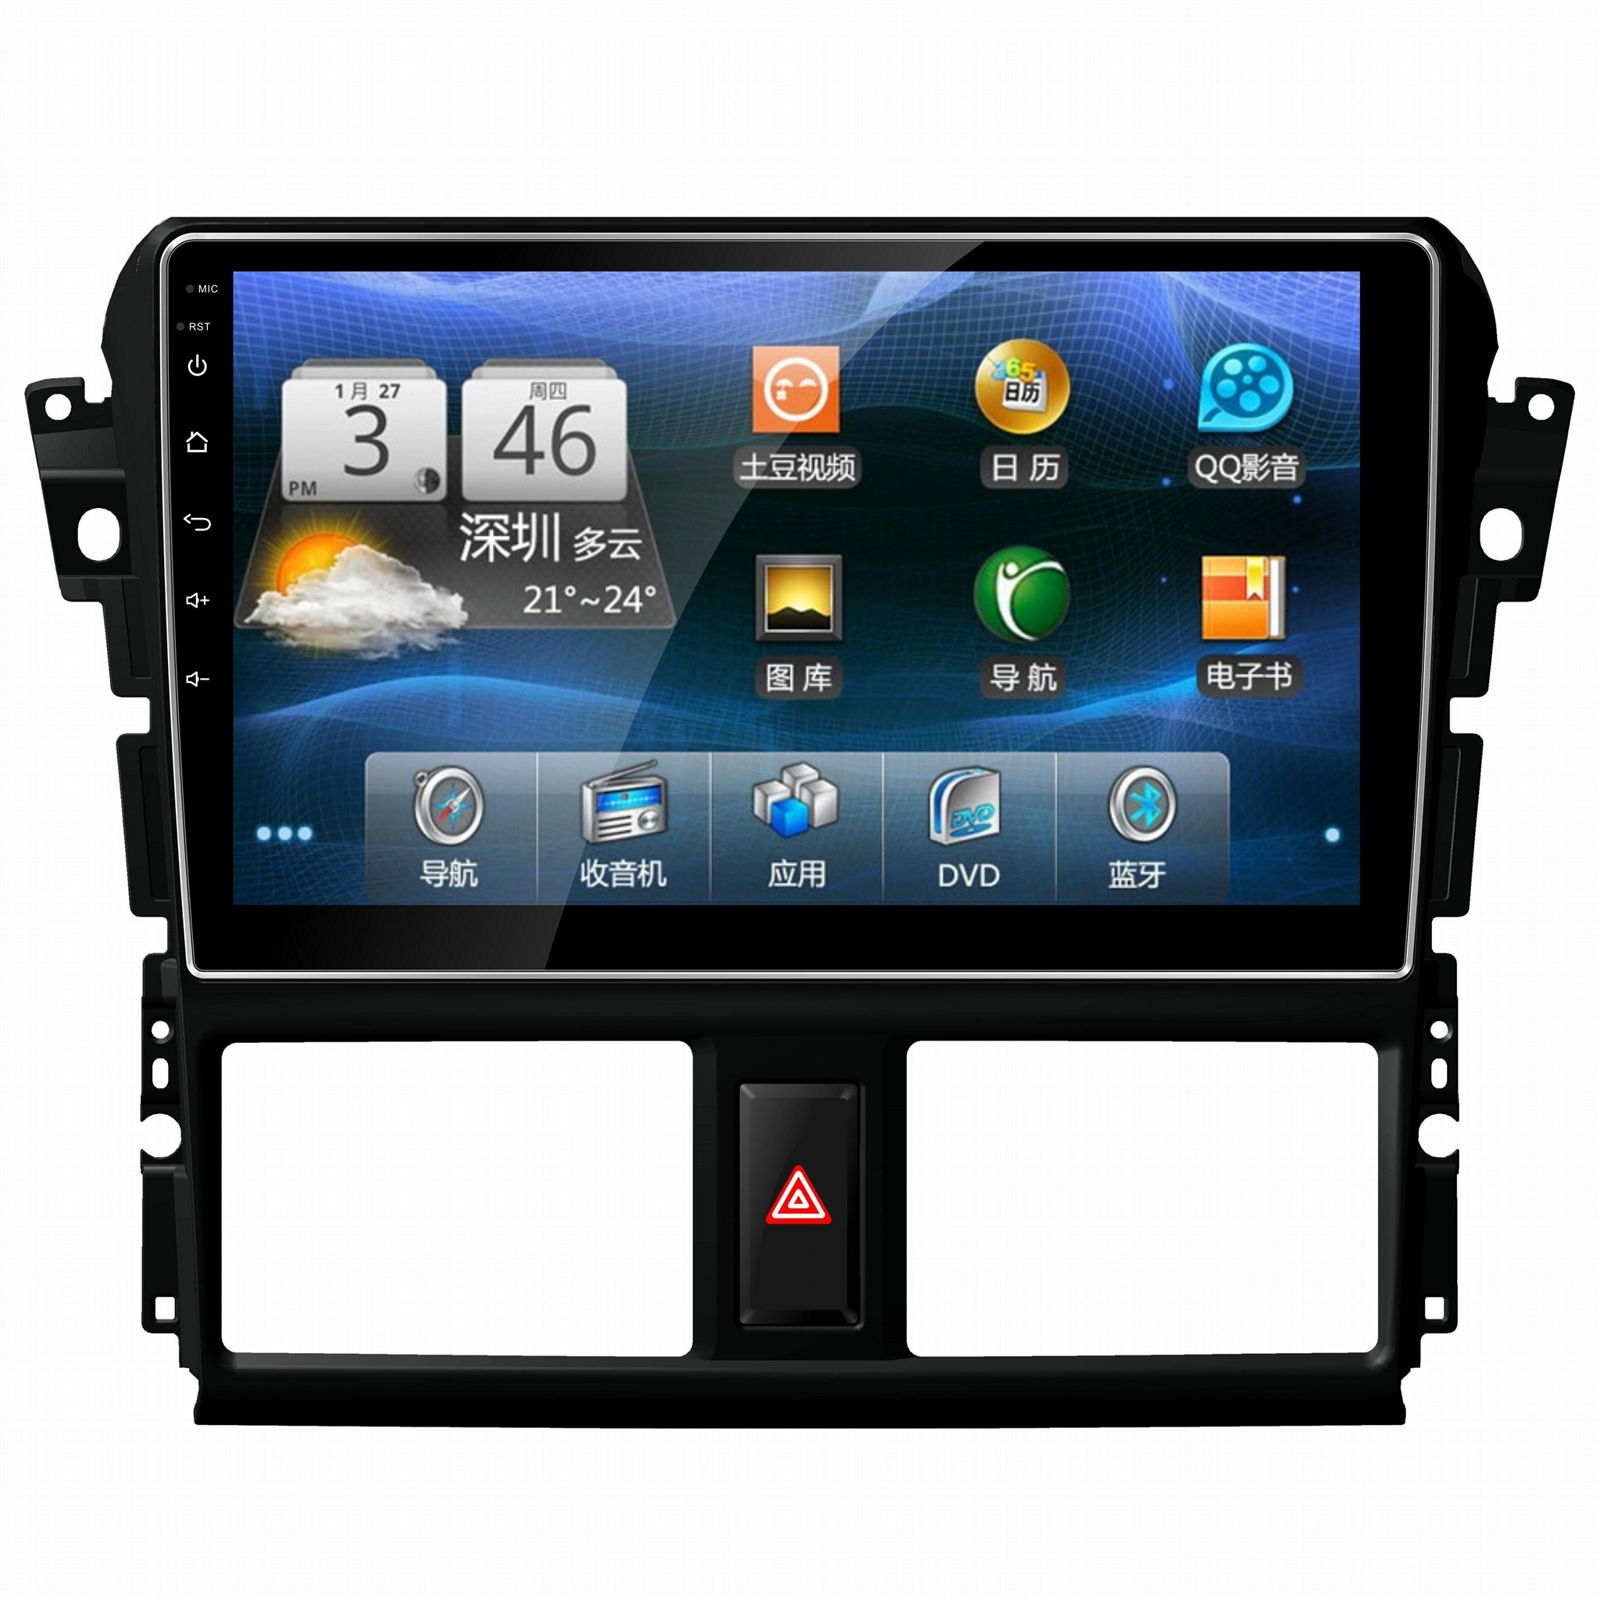 Android 6.0 10.1 inch car dvd player for Toyota VIOS Gps Navigation